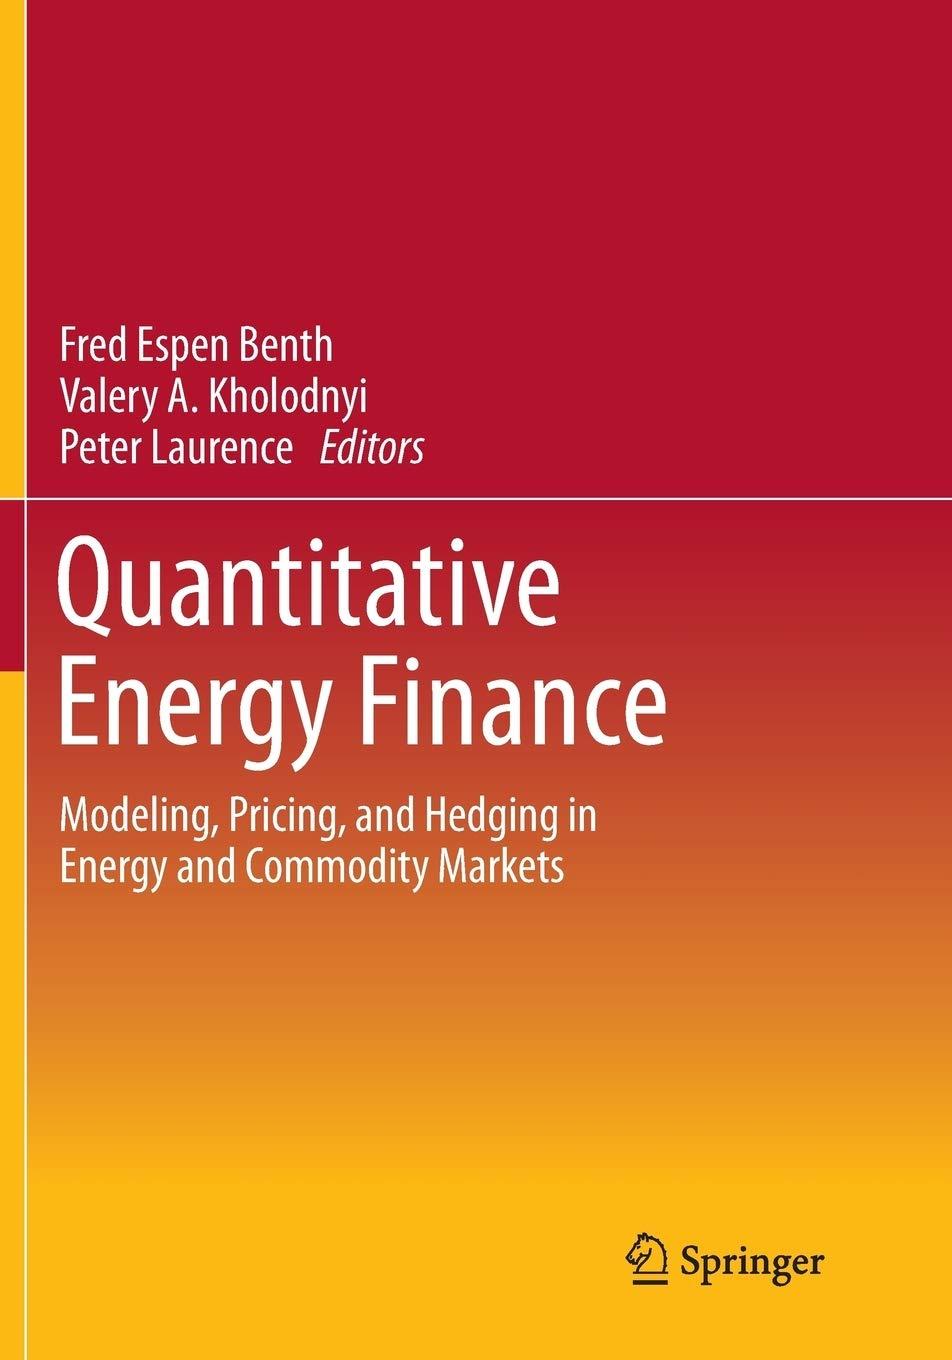 quantitative energy finance modeling pricing and hedging in energy and commodity markets 1st edition fred